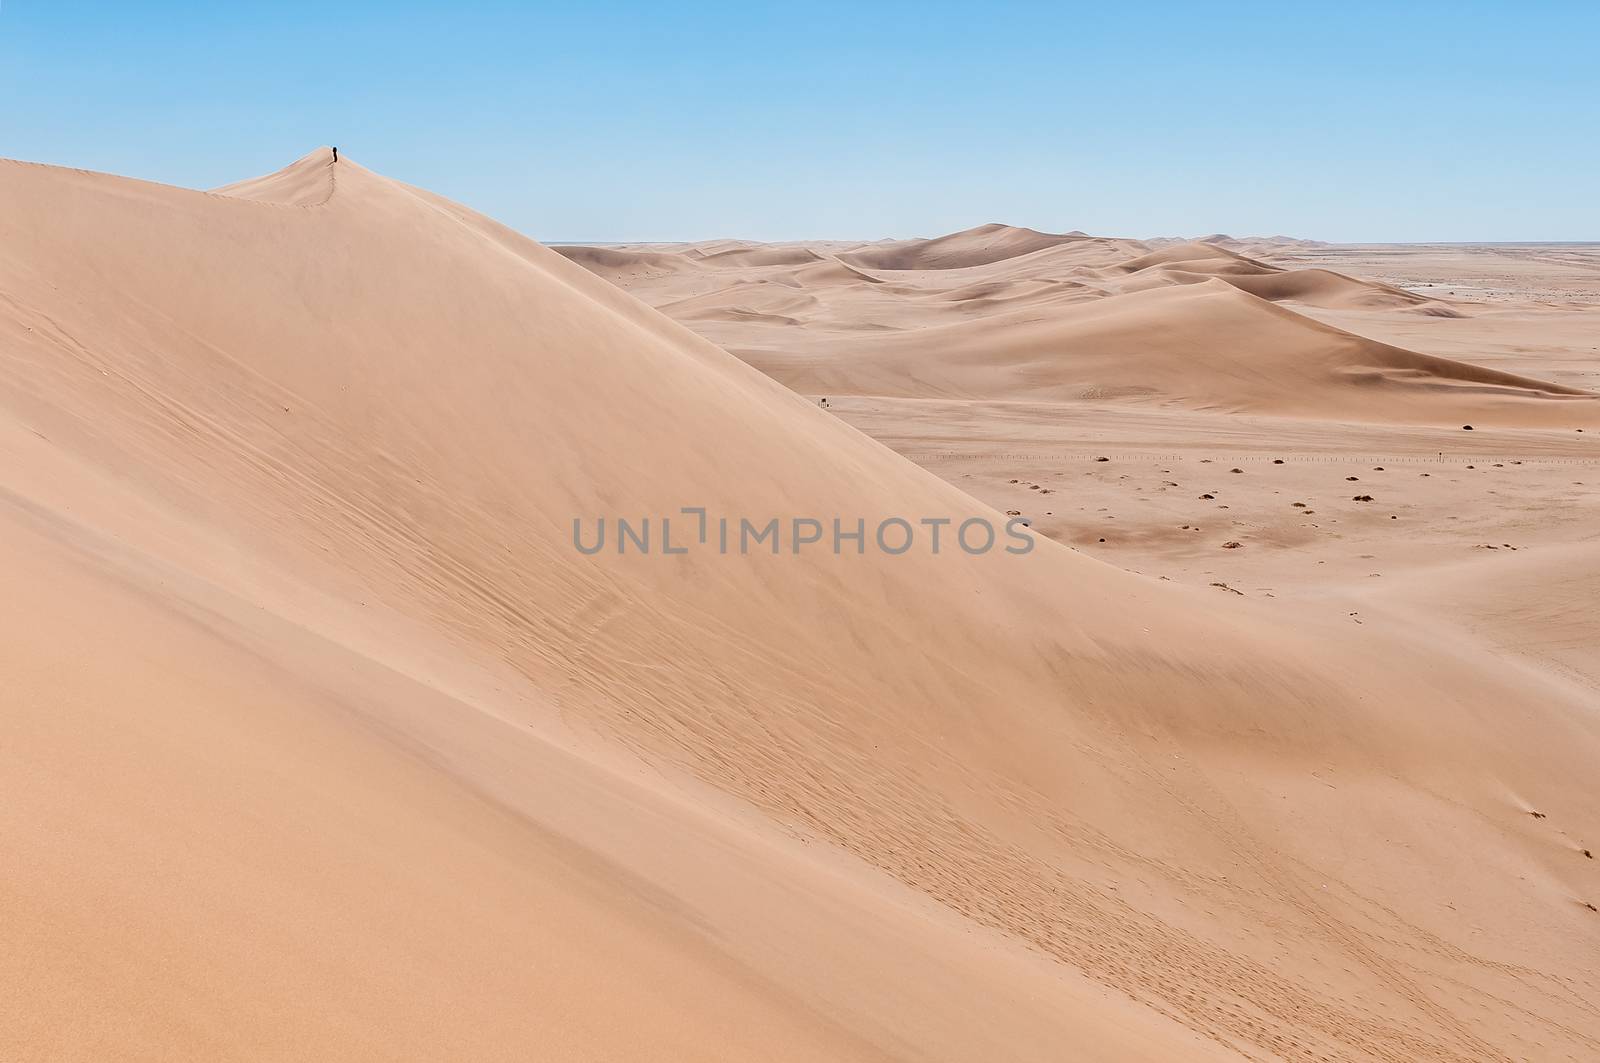 A person is visible on Dune 7 at Walvis Bay on the Atlantic Ocean coast of Namibia